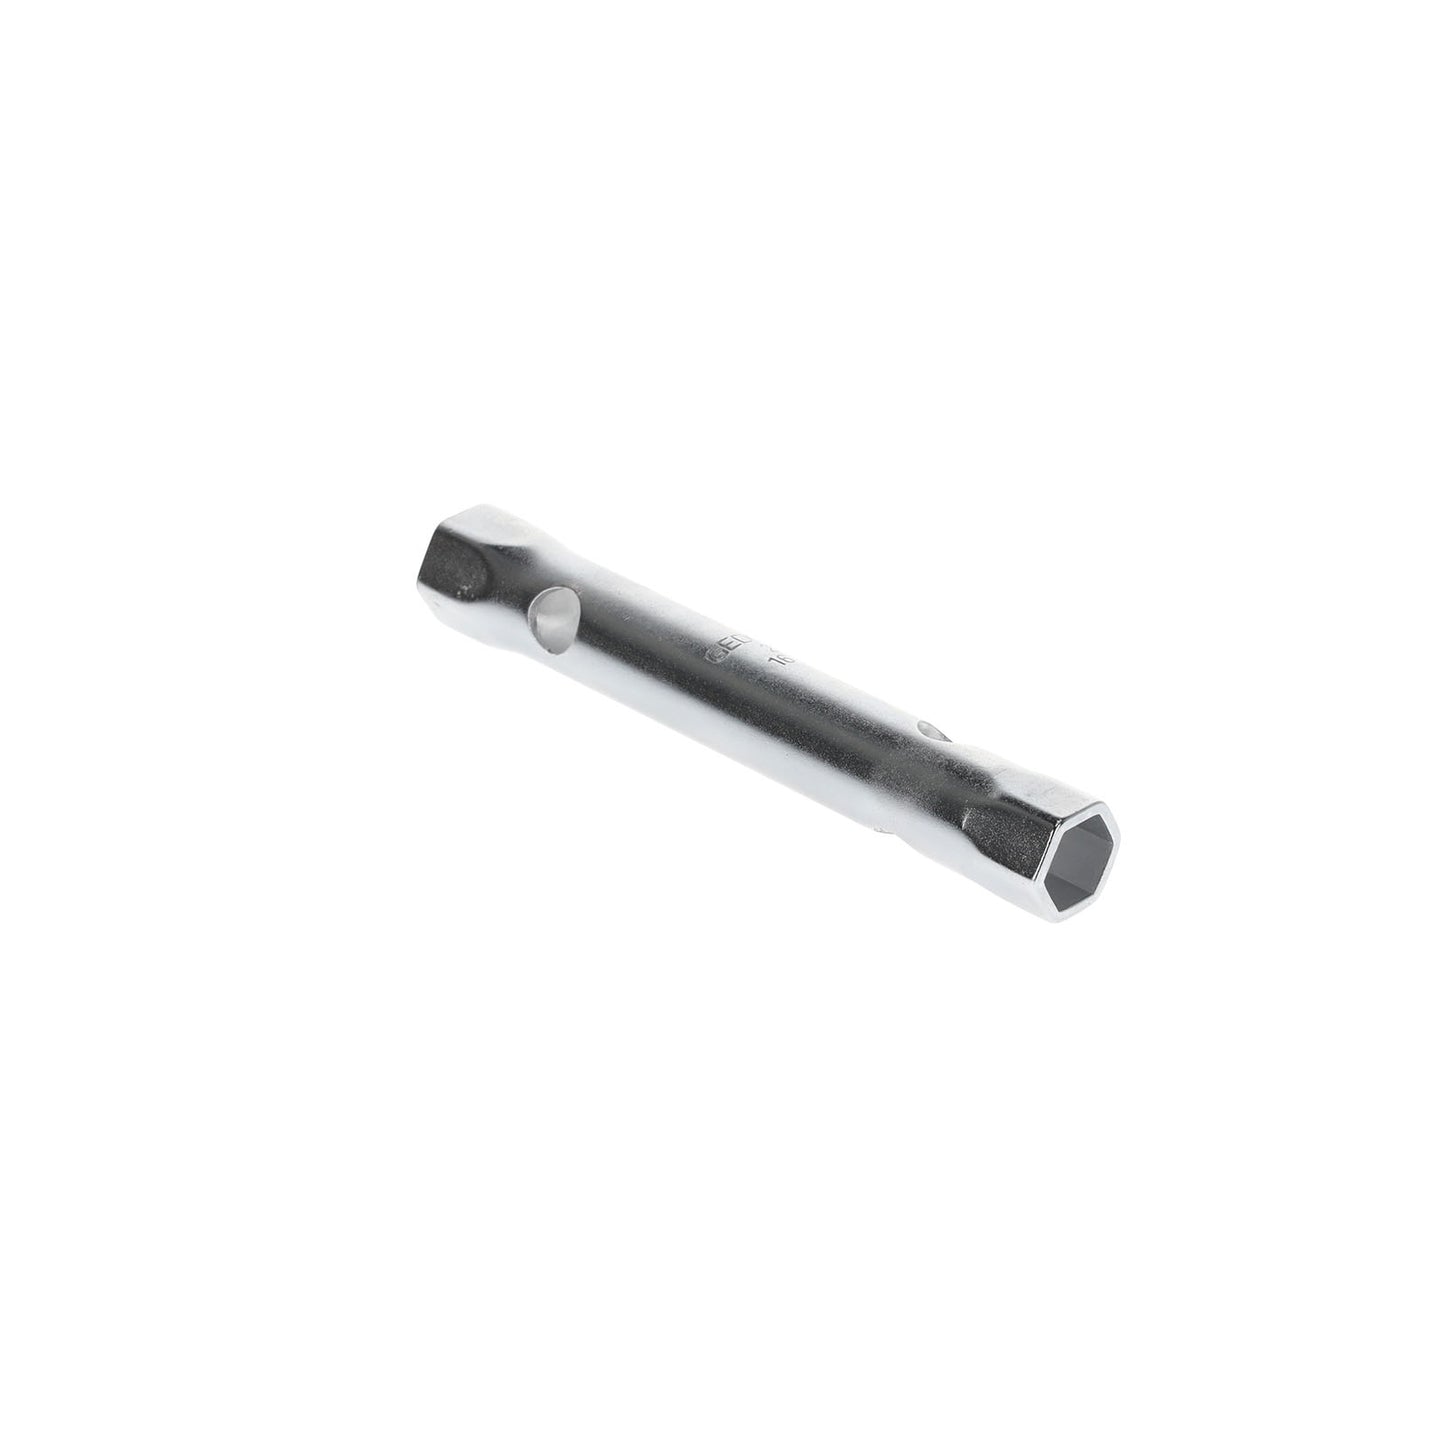 GEDORE 26 R 16X18 - Hollow Socket Wrench, 16x18 (6223030)